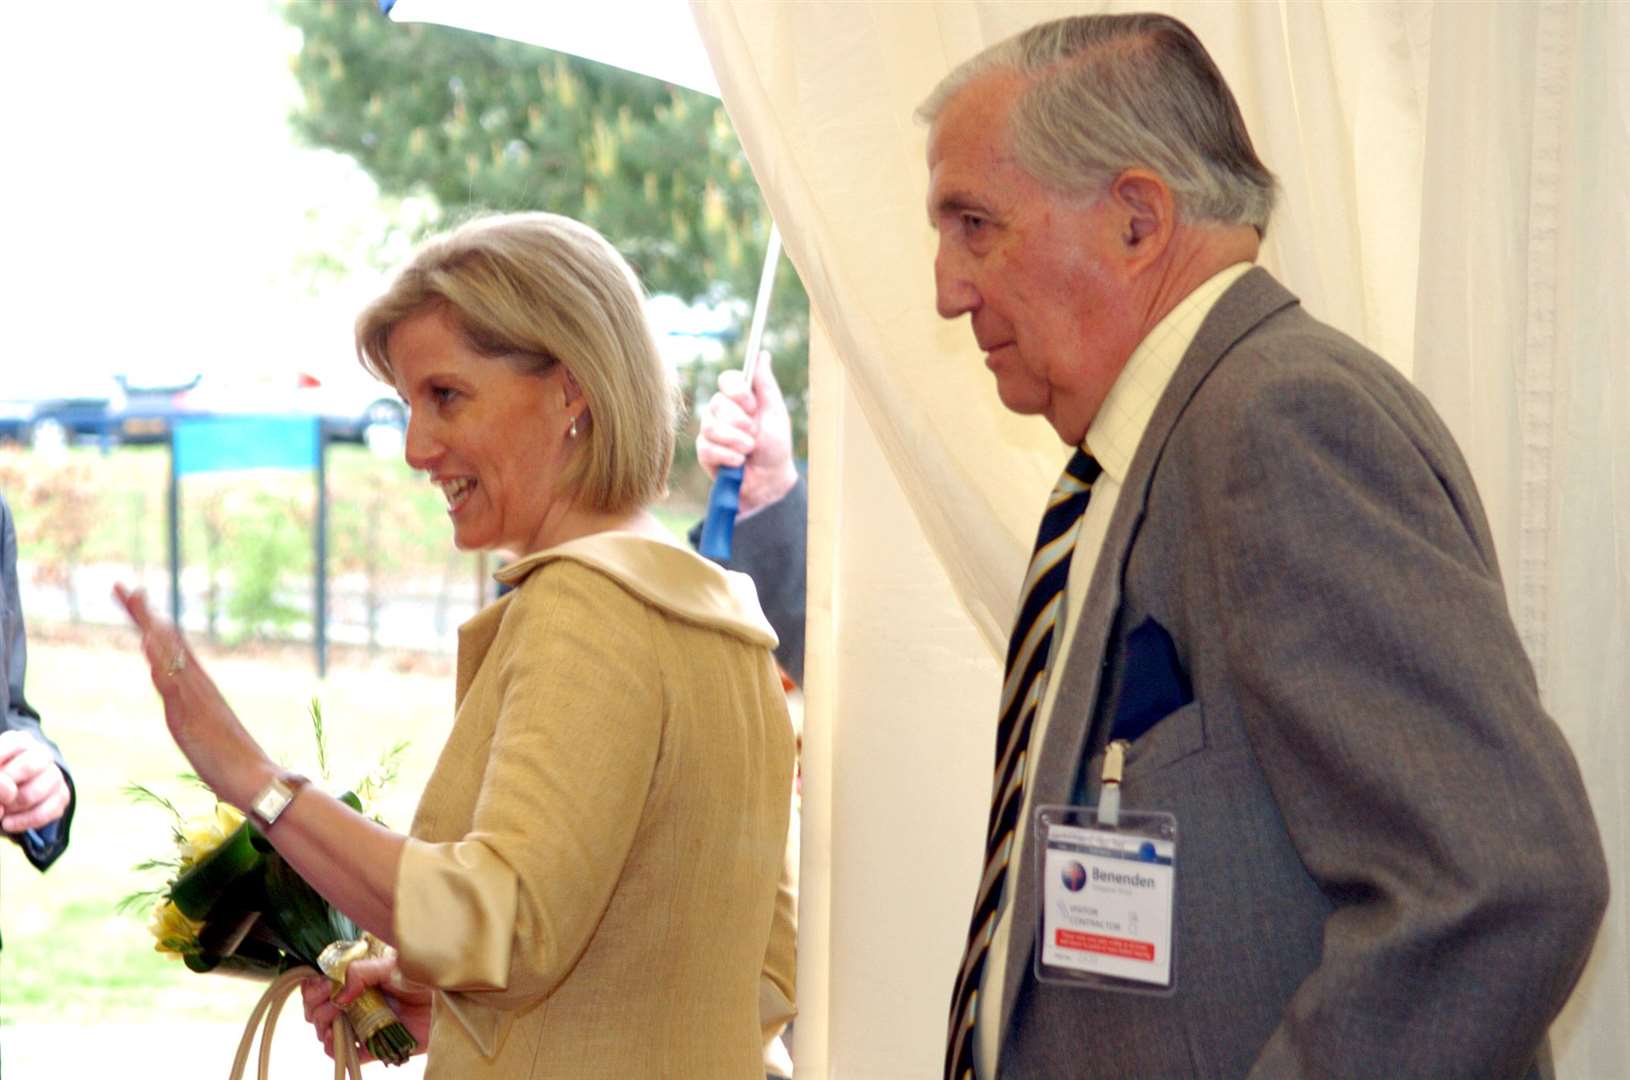 The Countess of Wessex during a visit to Benenden Hospital, pictured with her father Christopher Rhys-Jones. Picture by Matthew Walker